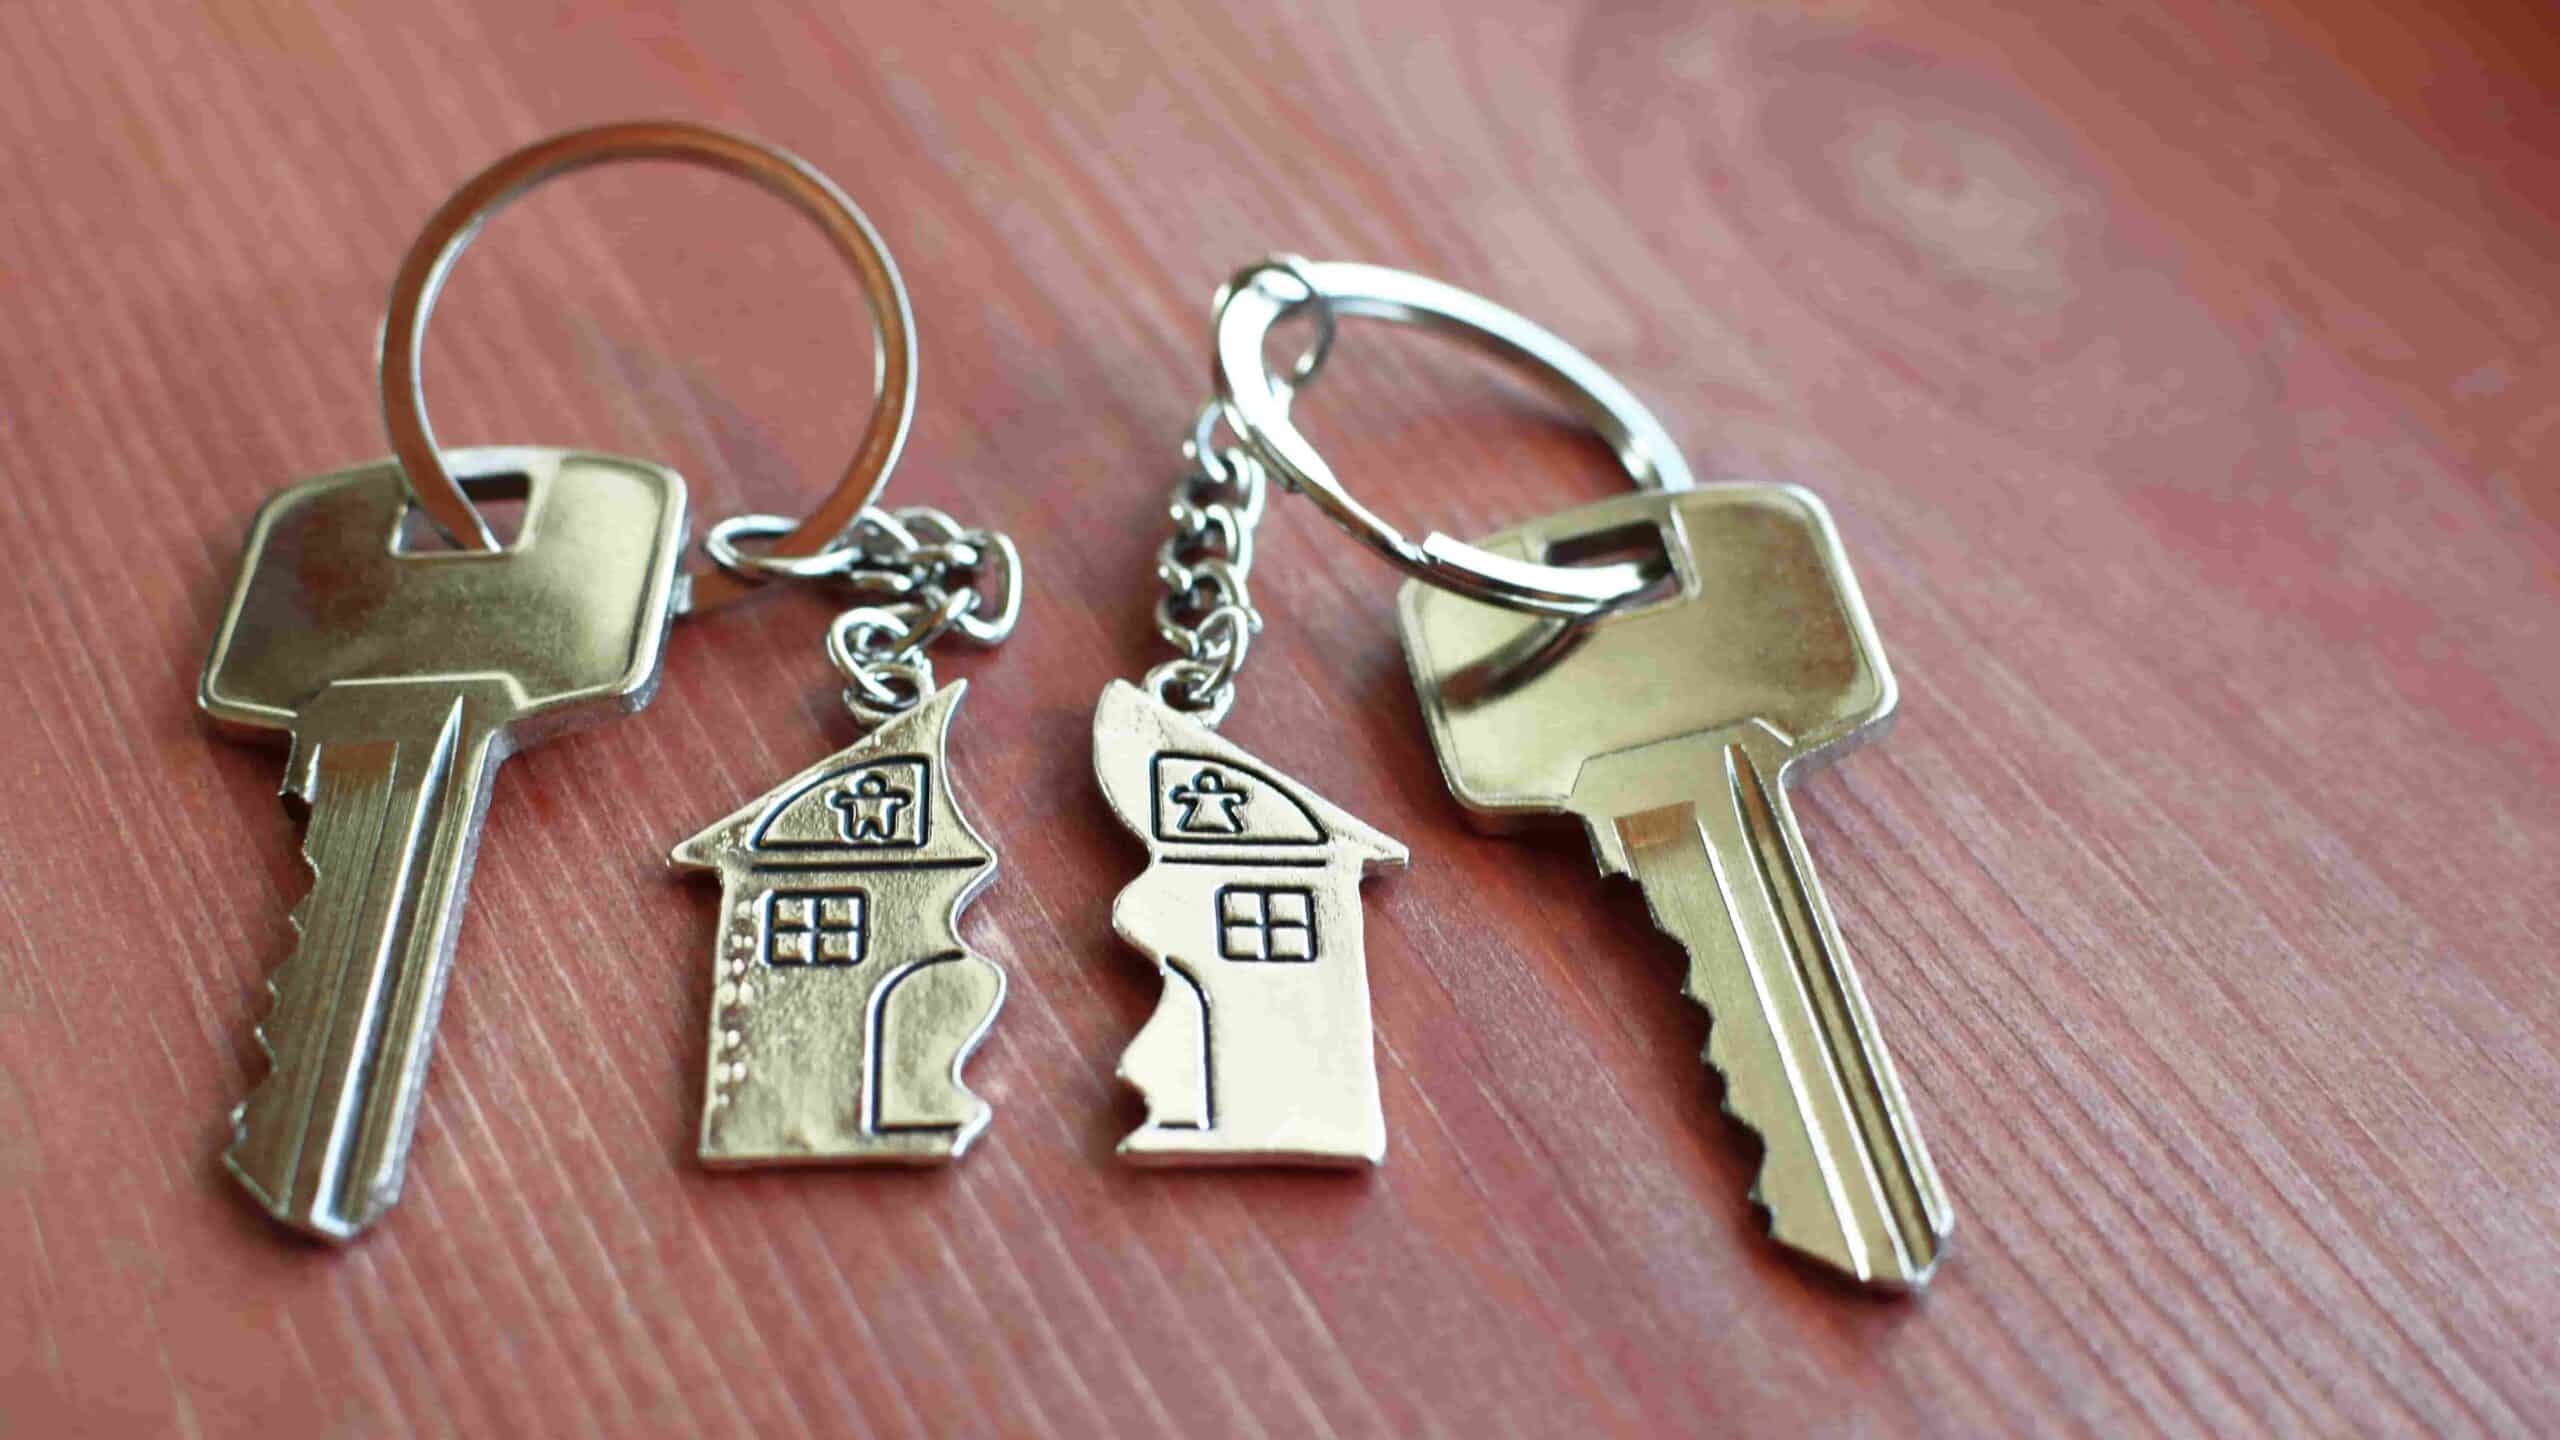 Pendant of key ring in shape of house divided in two parts on wooden background, closeup view.Illustrating the concept of moving out upon a separation for our topic about who moves out when you separate